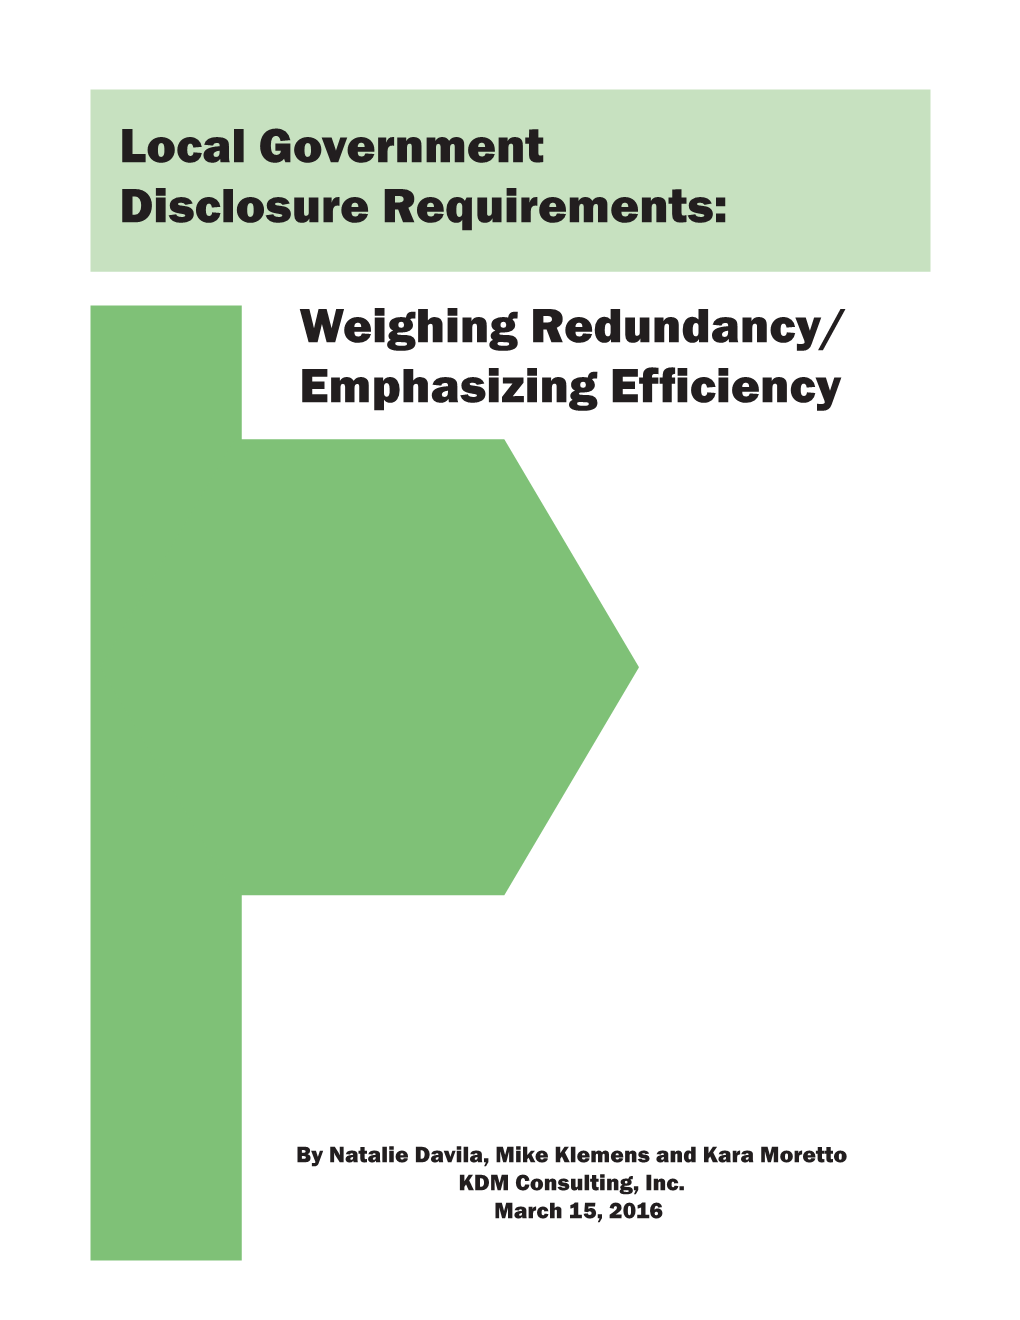 Local Government Disclosure Requirements.Indd